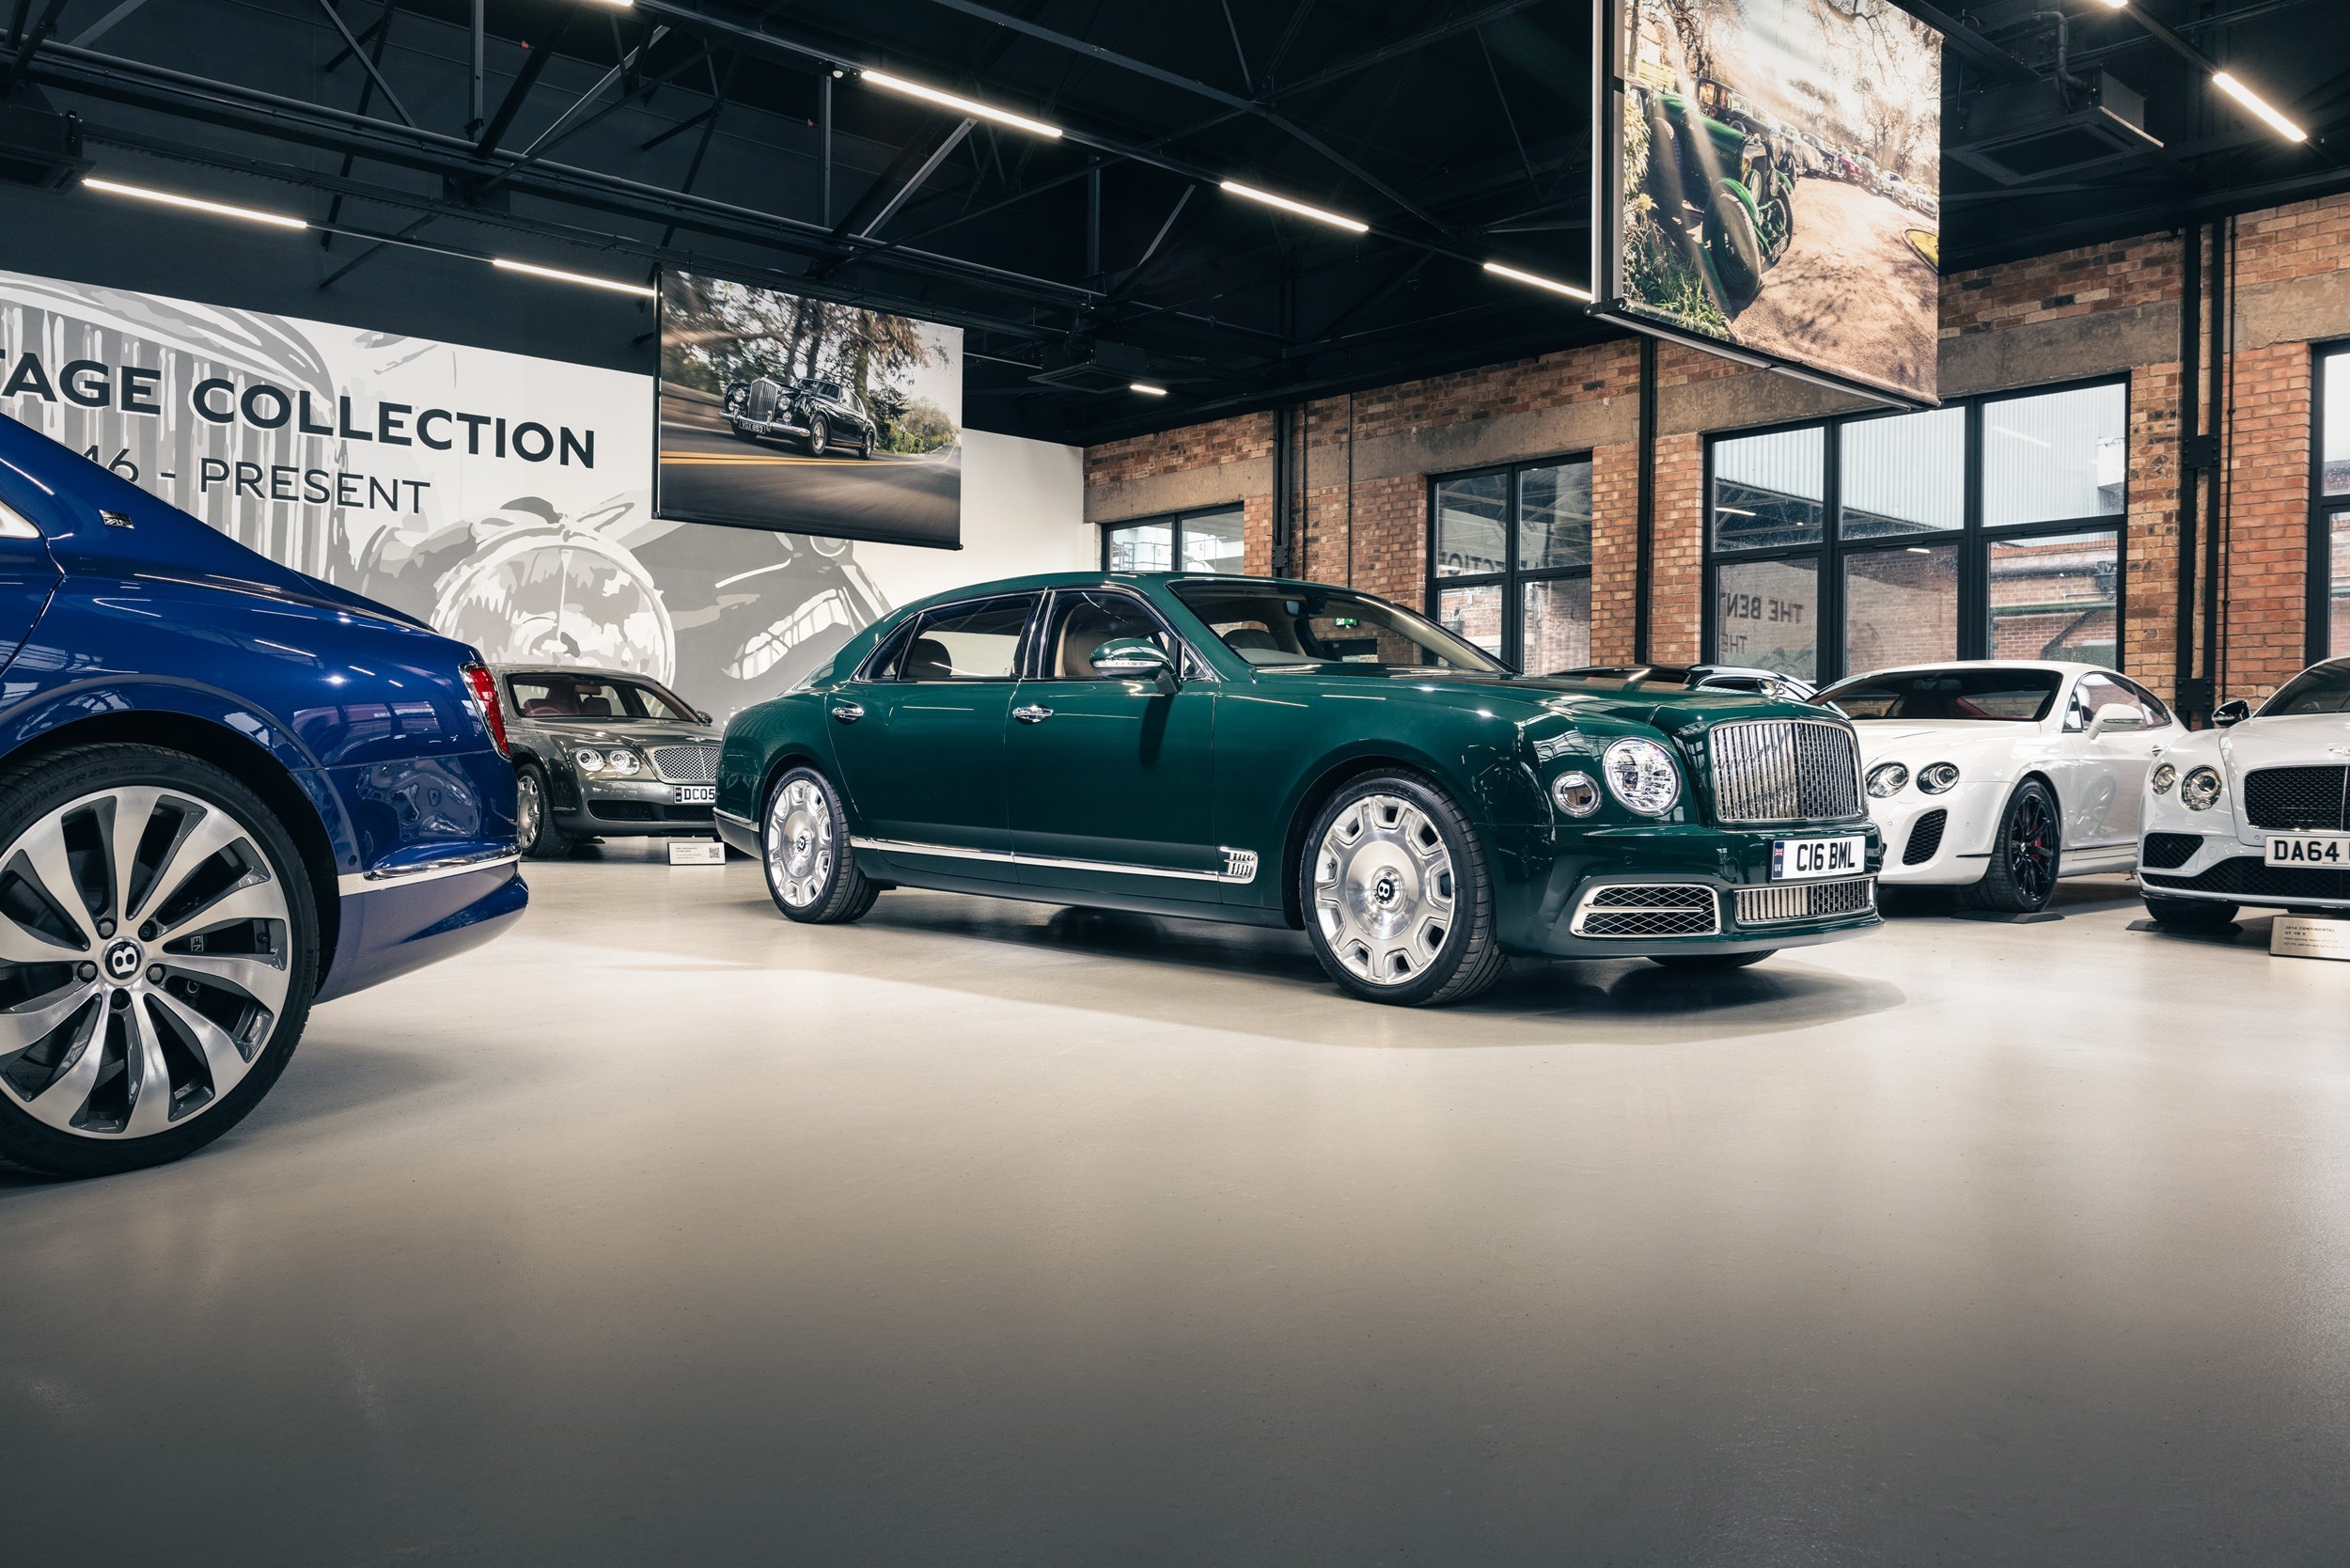 Colour , Green Image type , Static Angle , Side/Profile General , Heritage Archive Models , Mulsanne , Mulsanne Extended Wheelbase 